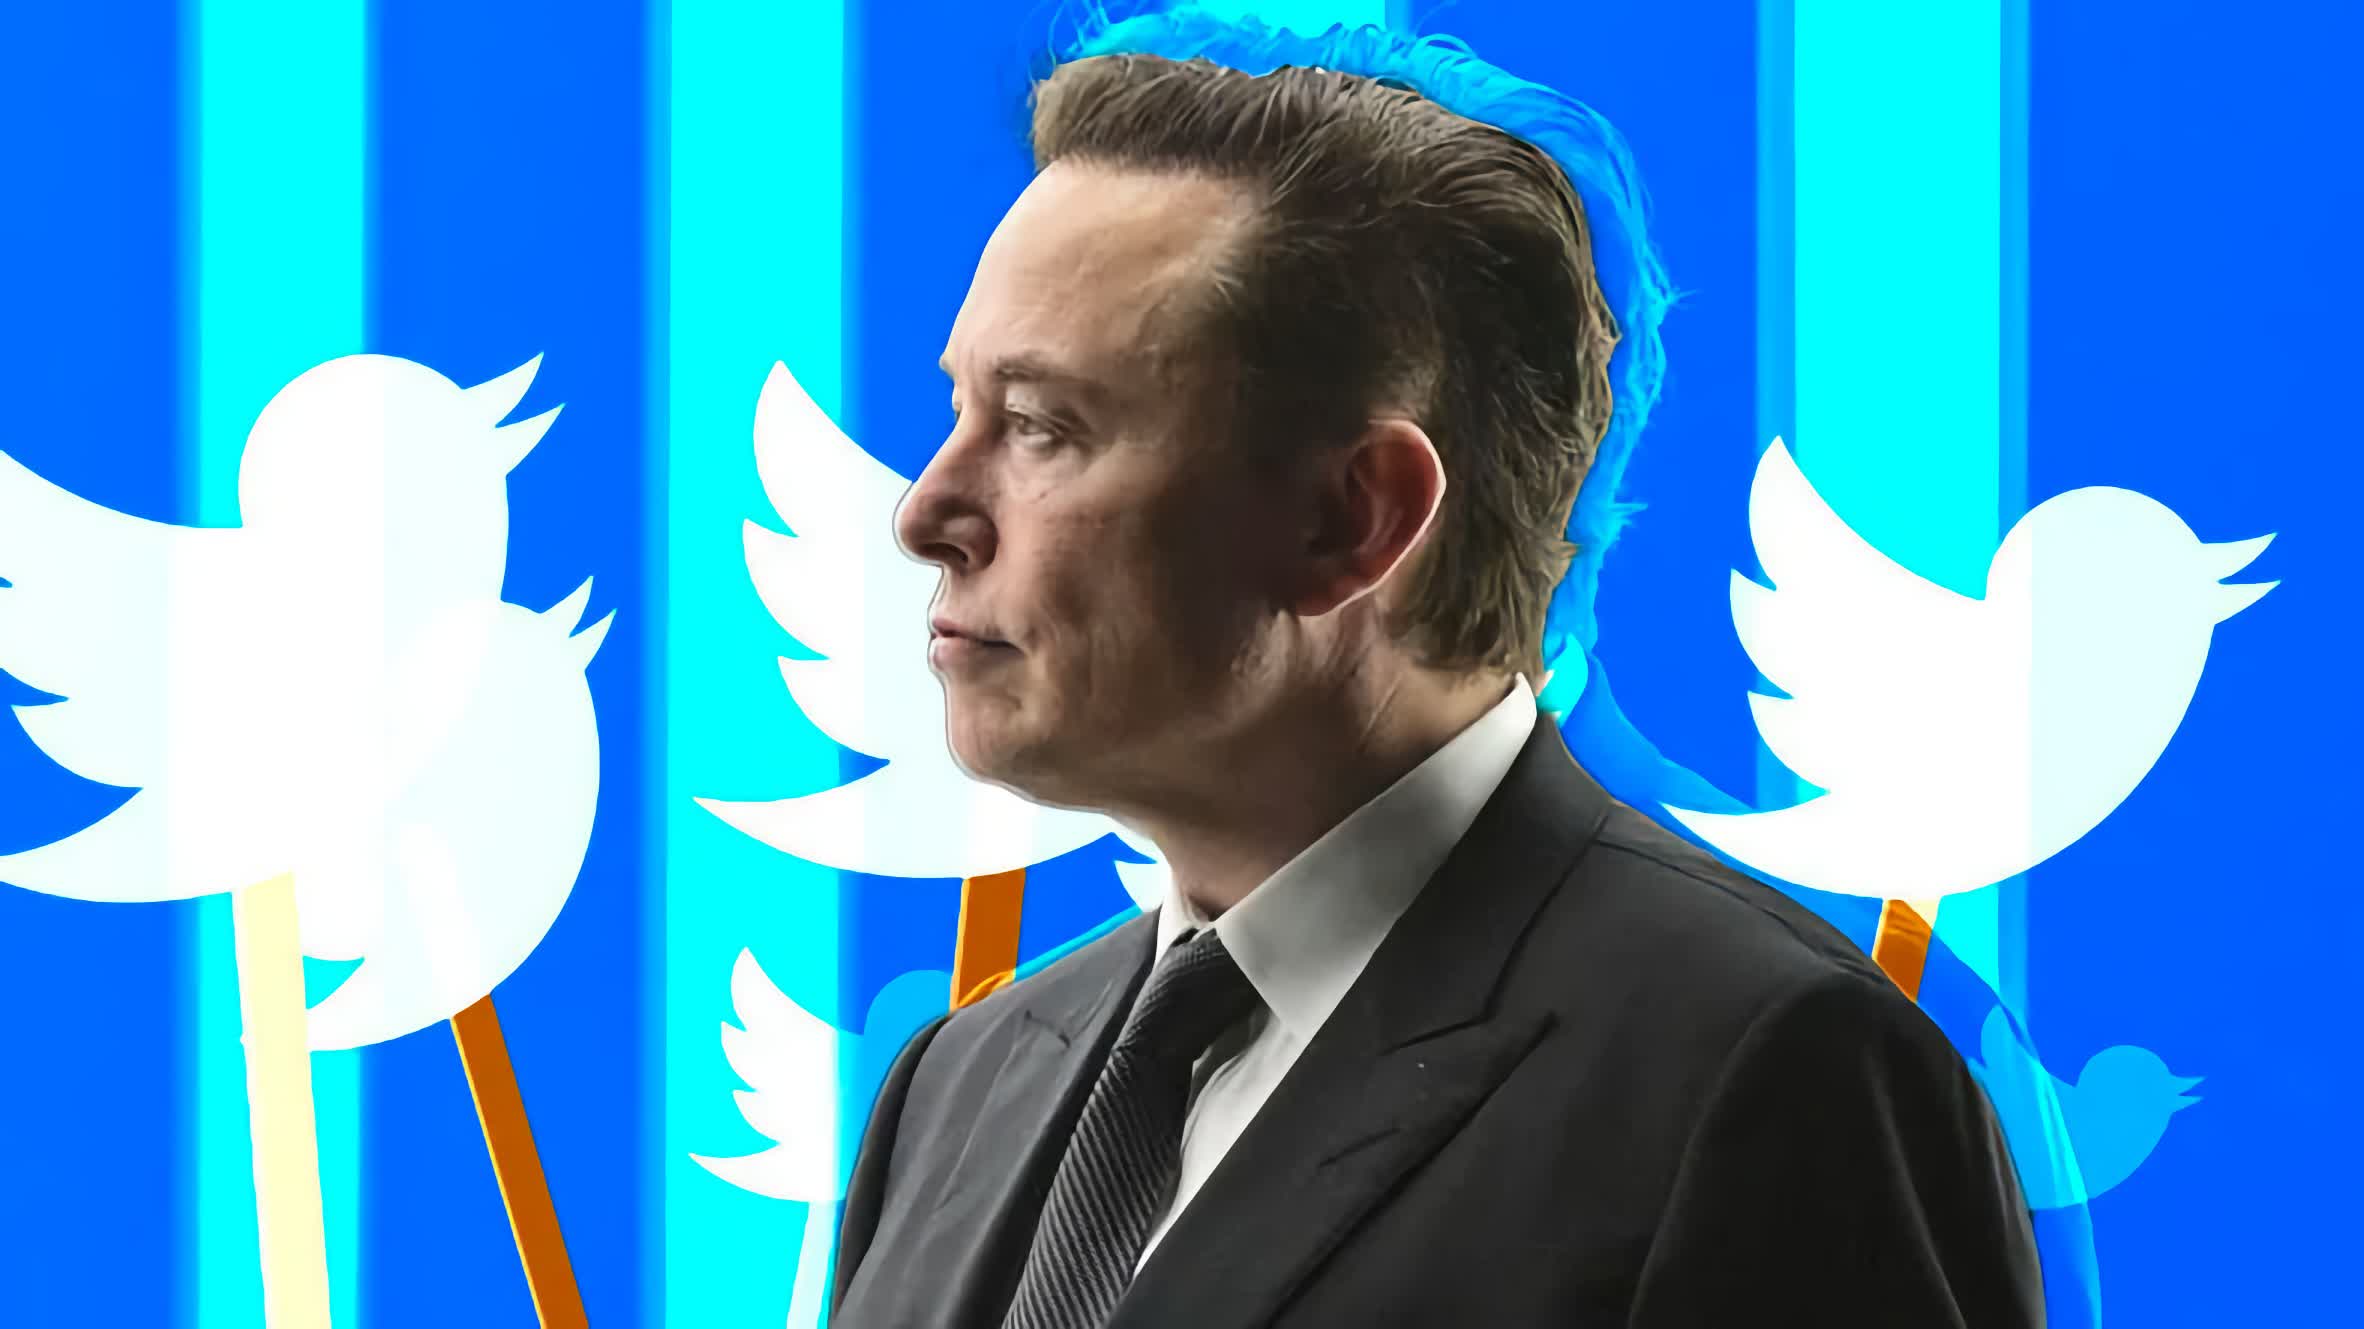 Twitter locks remaining employees out of offices after hundreds leave following Elon Musk's hardcore ultimatum